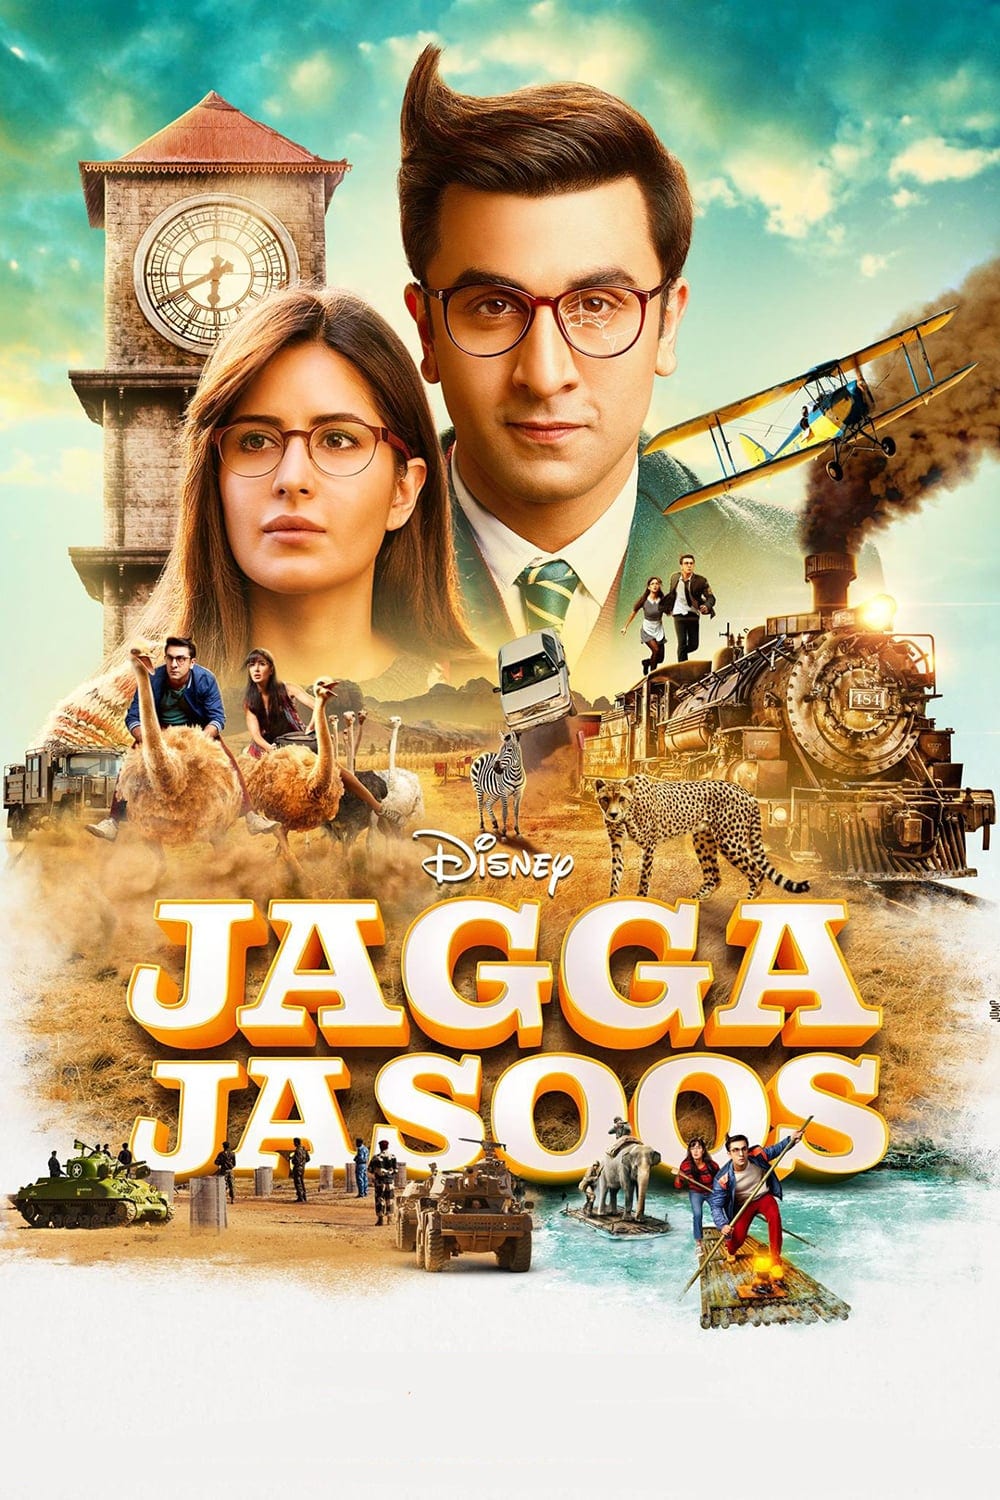 Poster for the movie "Jagga Jasoos"